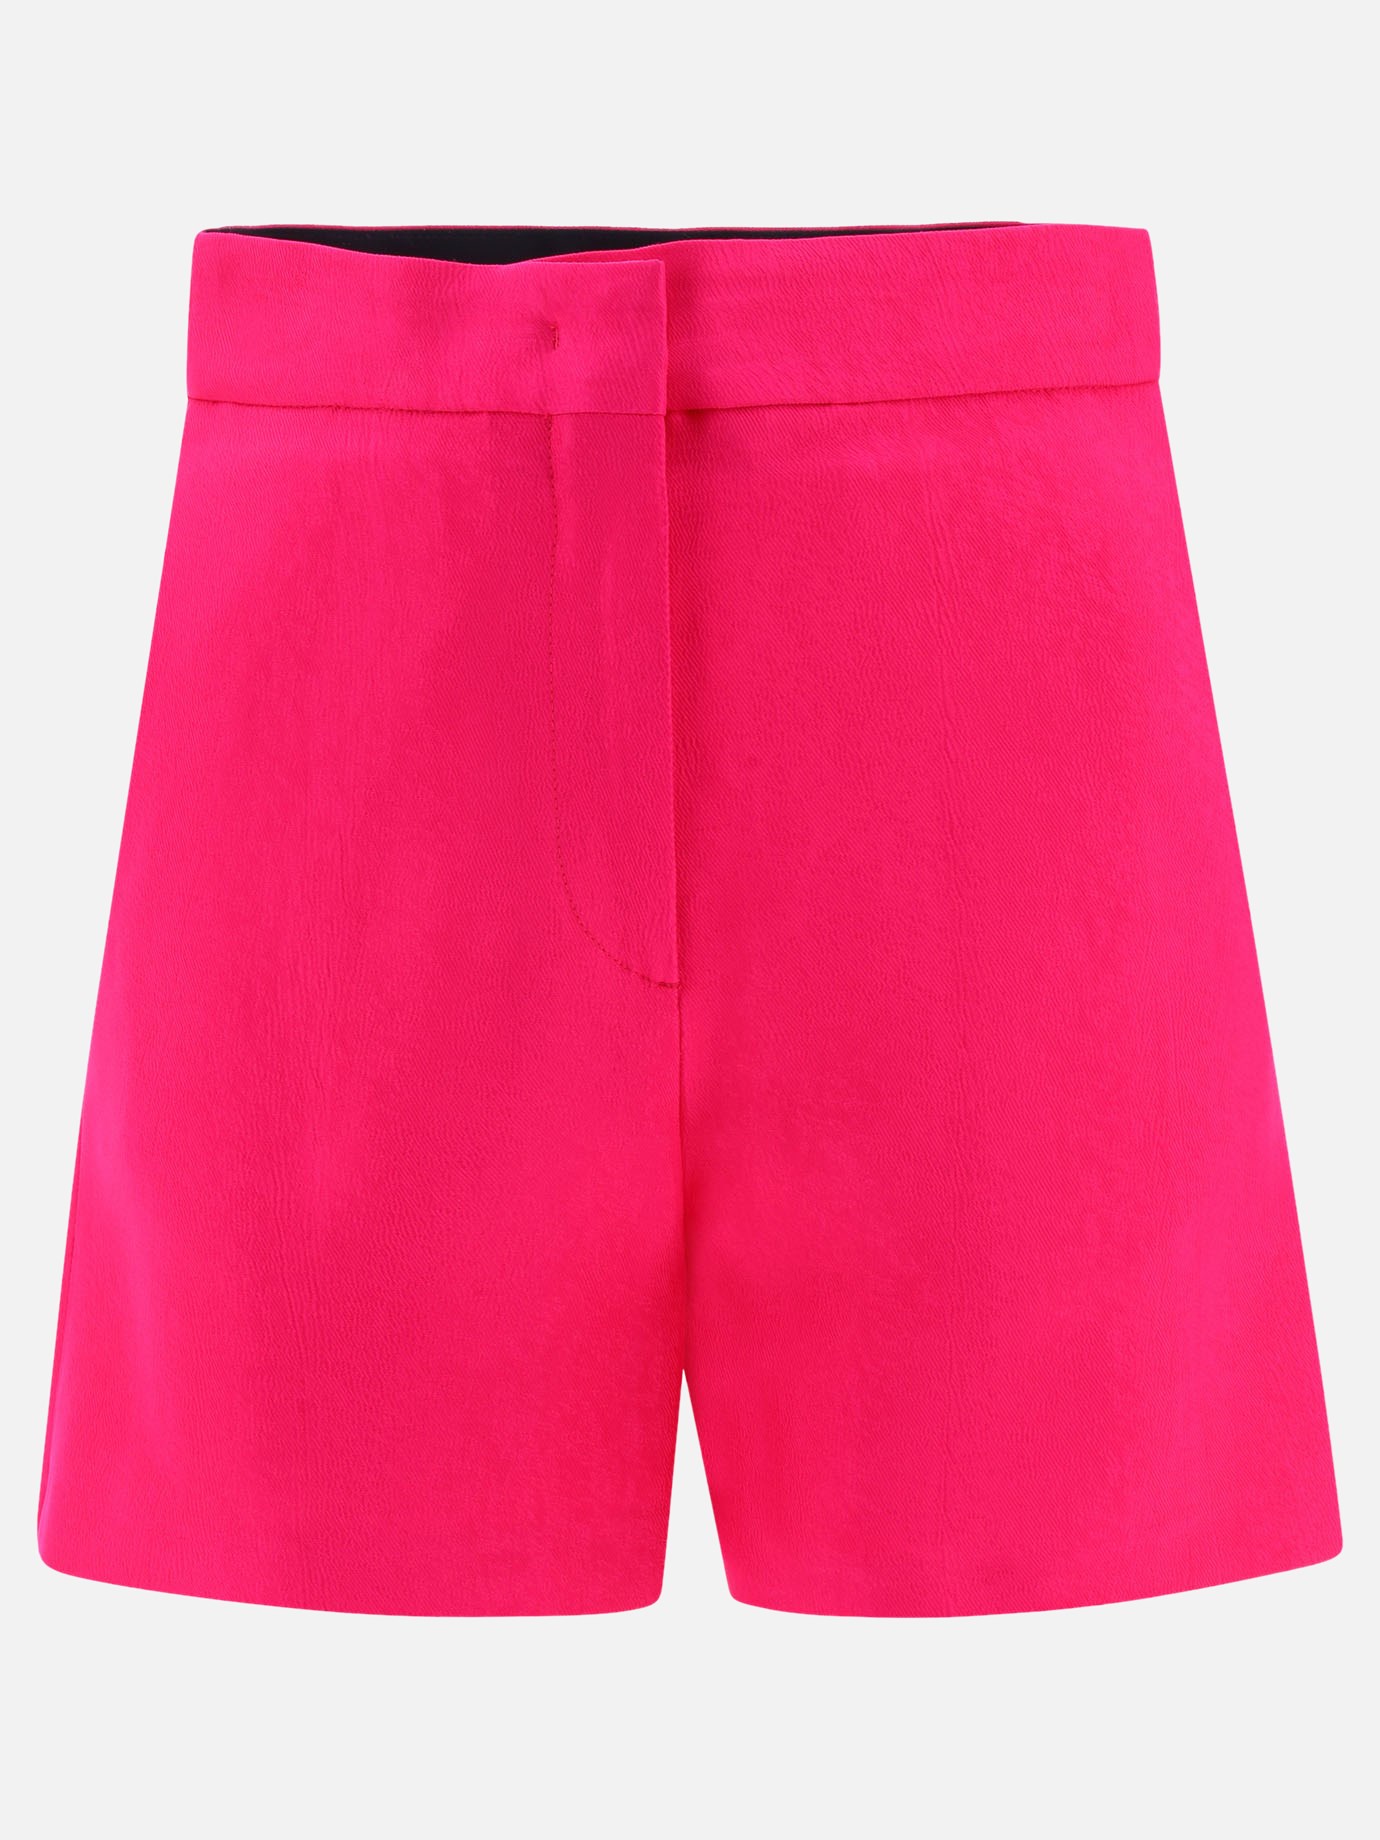 Tailored shortsby Msgm - 1